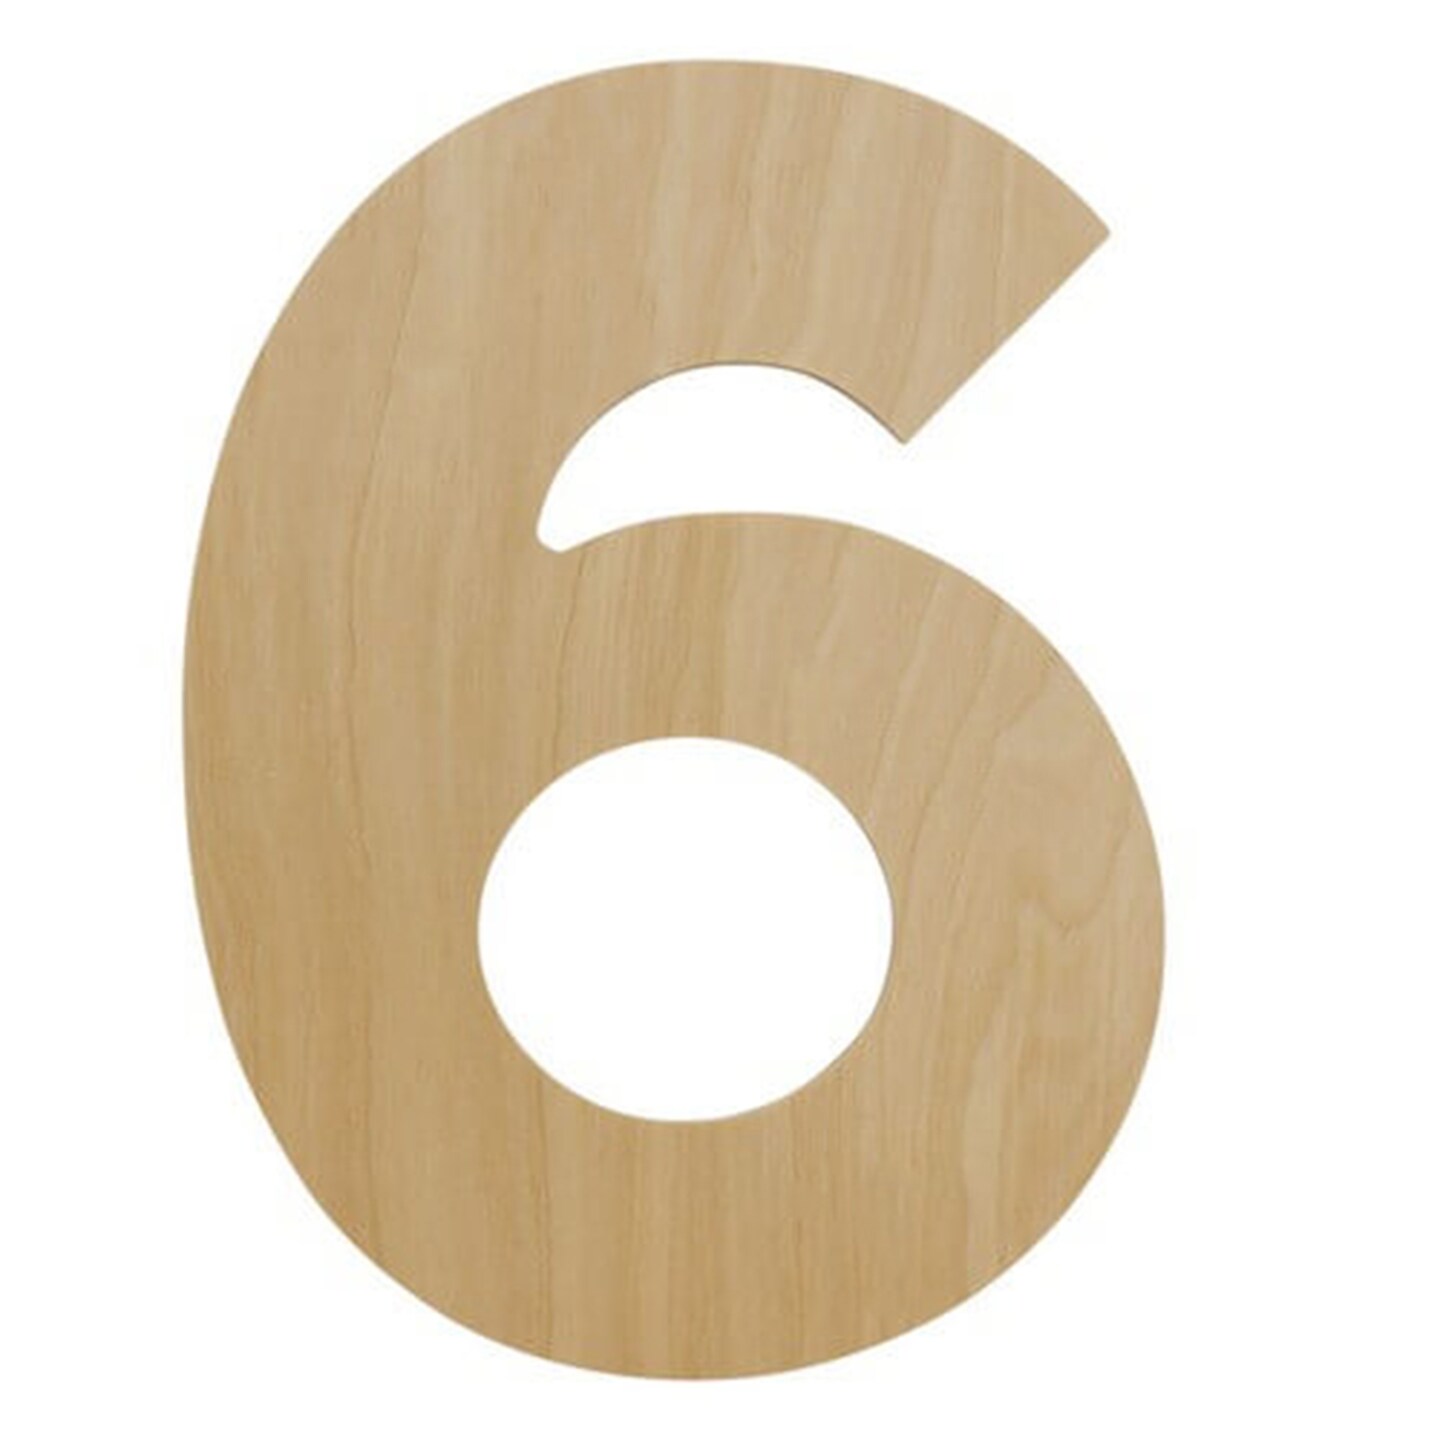 Wooden Number 6, 12 inch or 8 inch, Unfinished Large Wood Numbers for Crafts | Woodpeckers